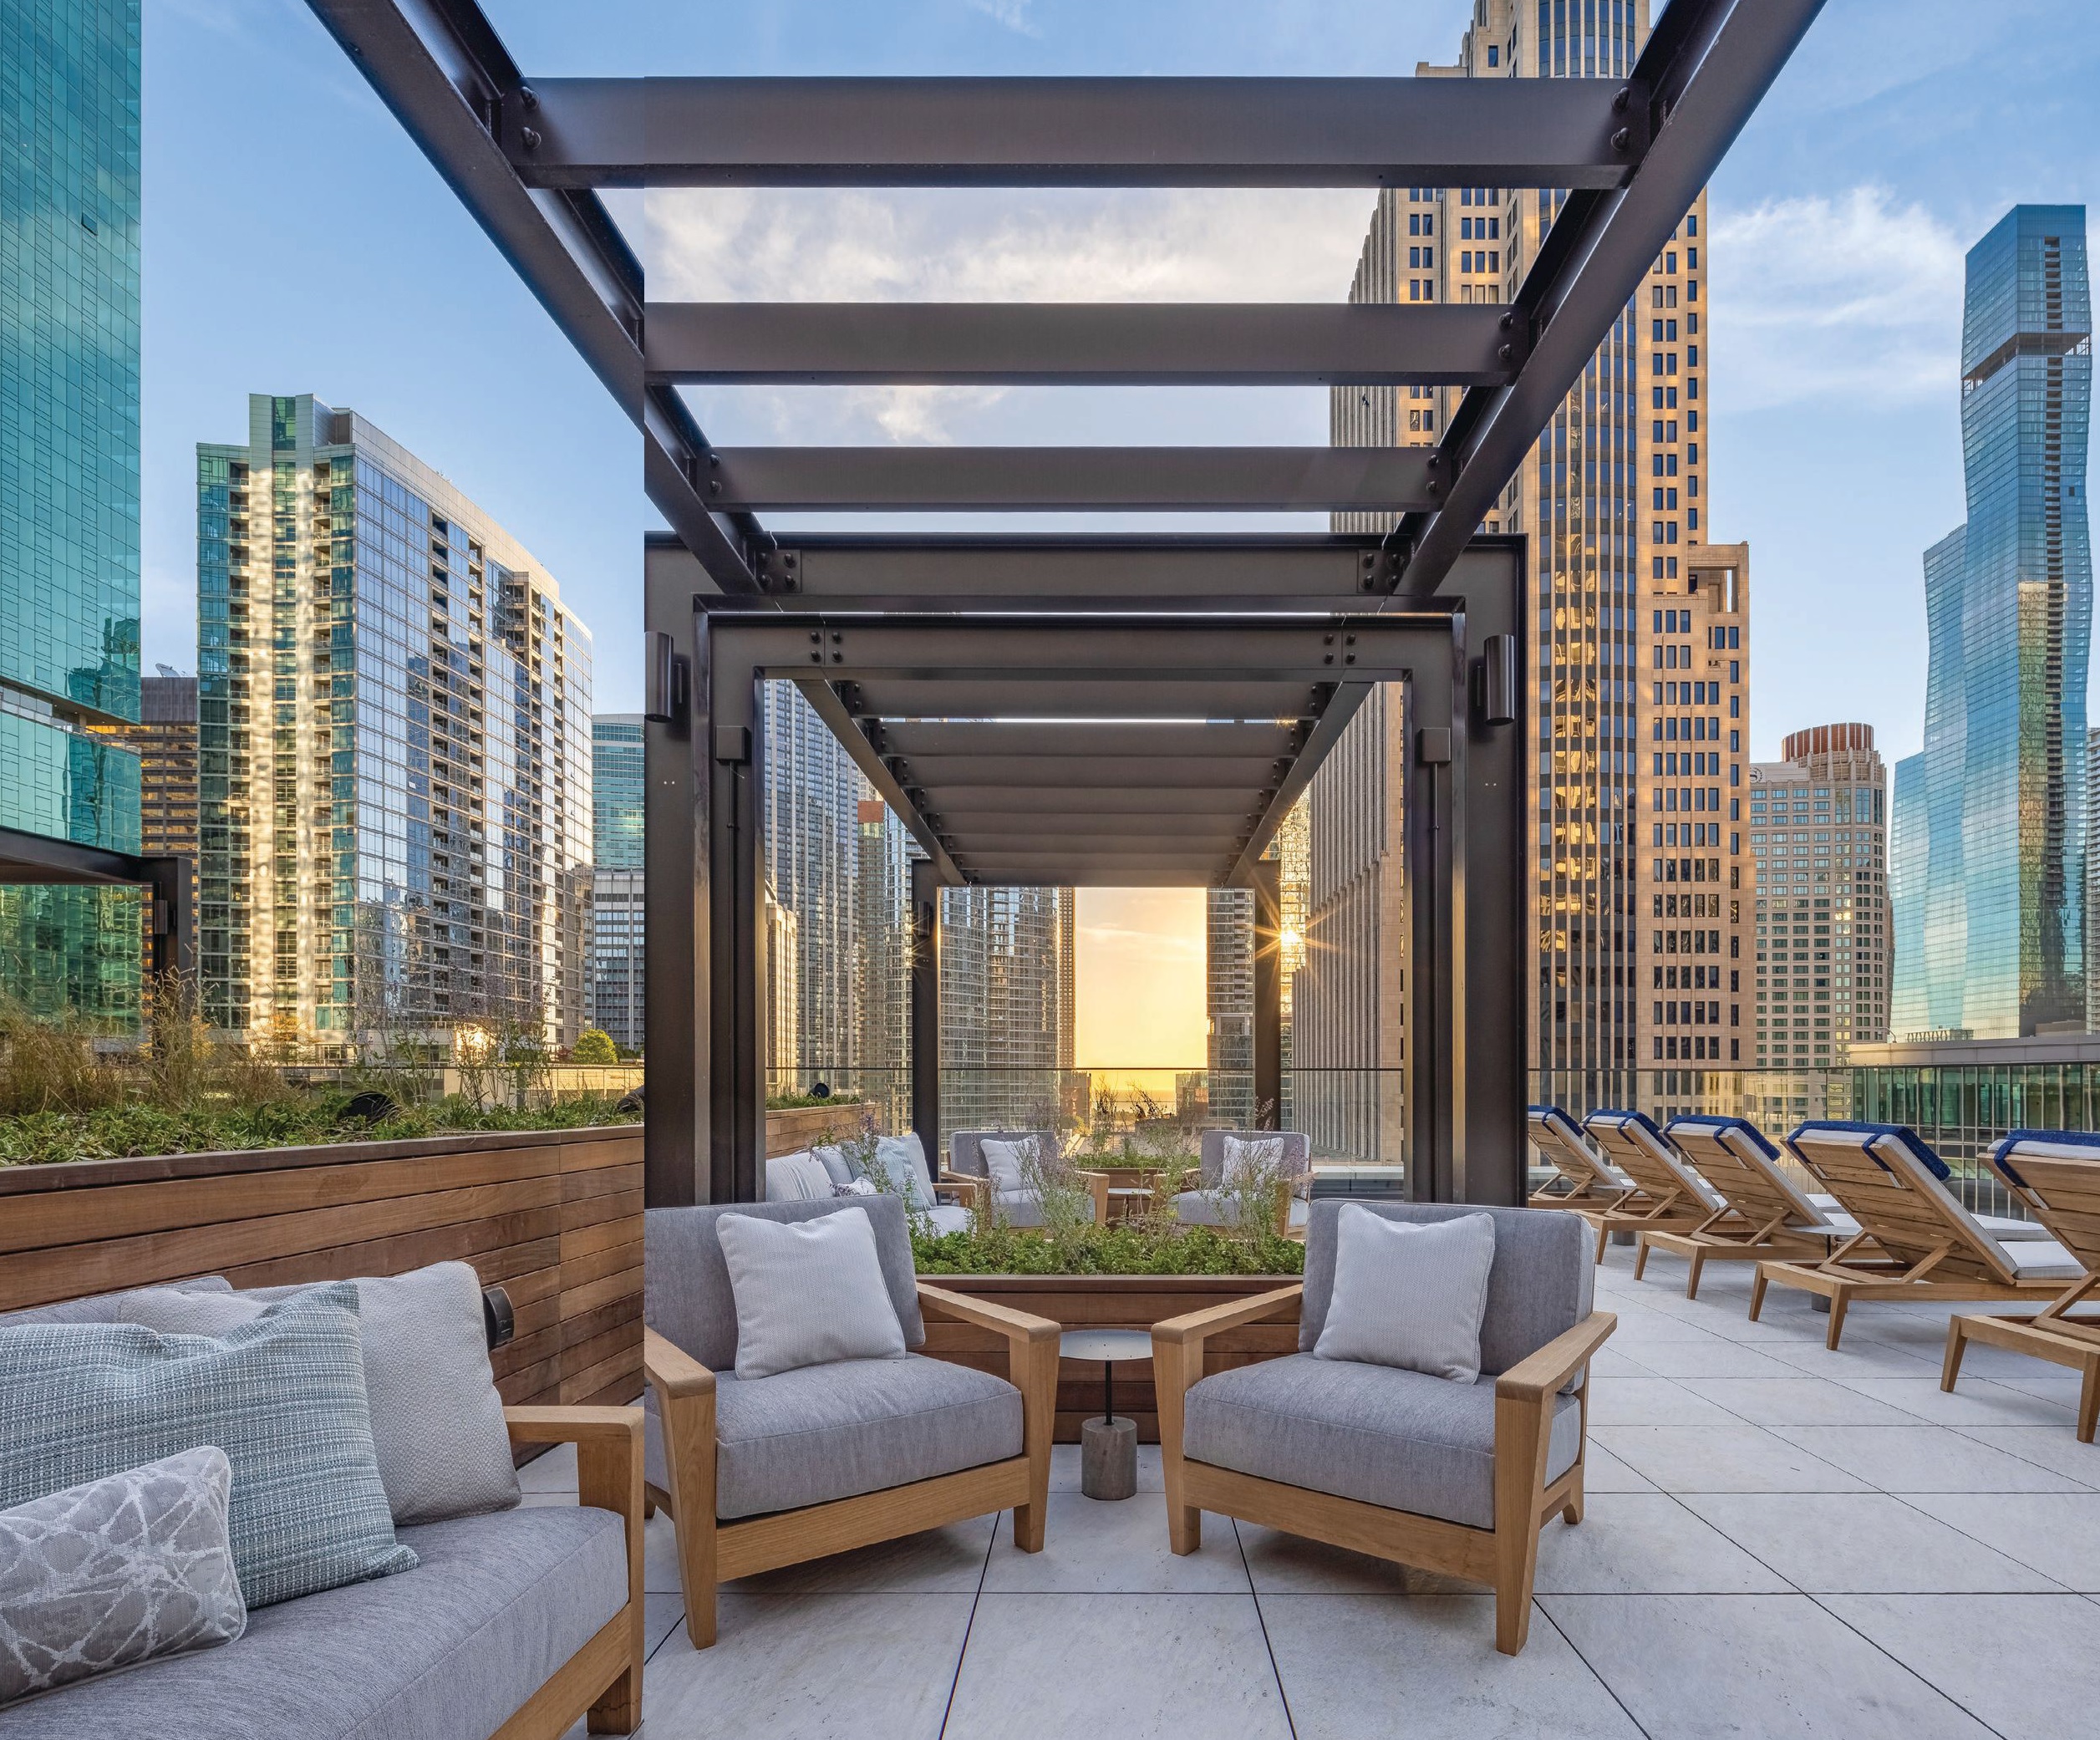 The seventh floor’s elevated outdoor terrace offers stunning views through the iconic Chicago Tribune sign.